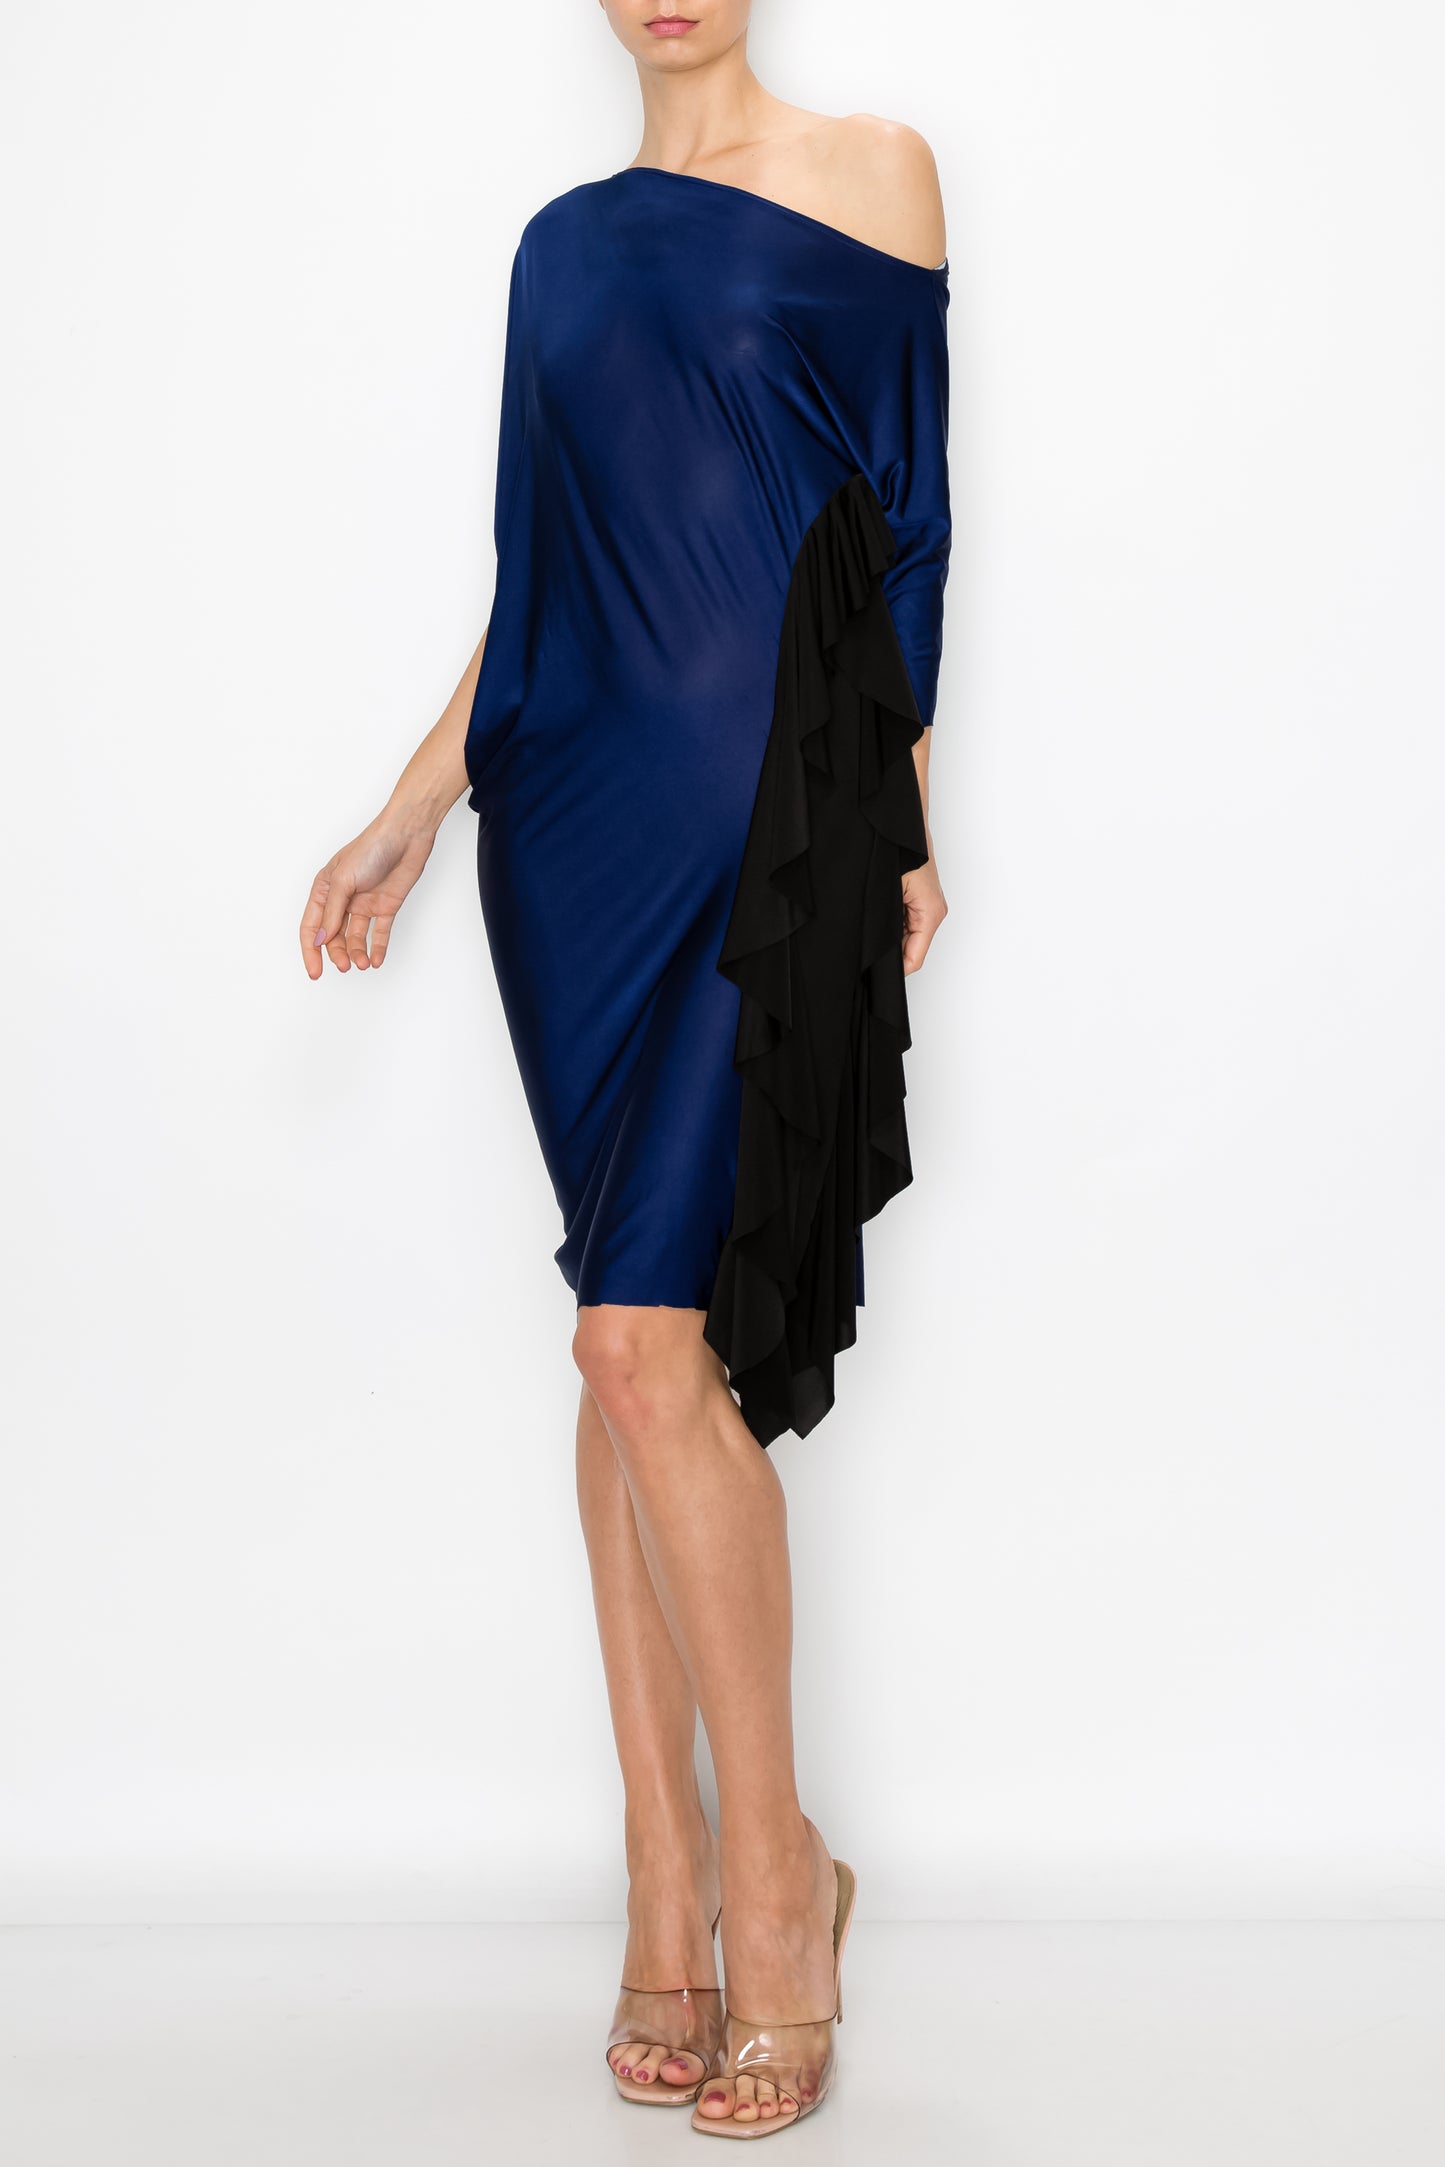 The Icon Navy Dress Transformable